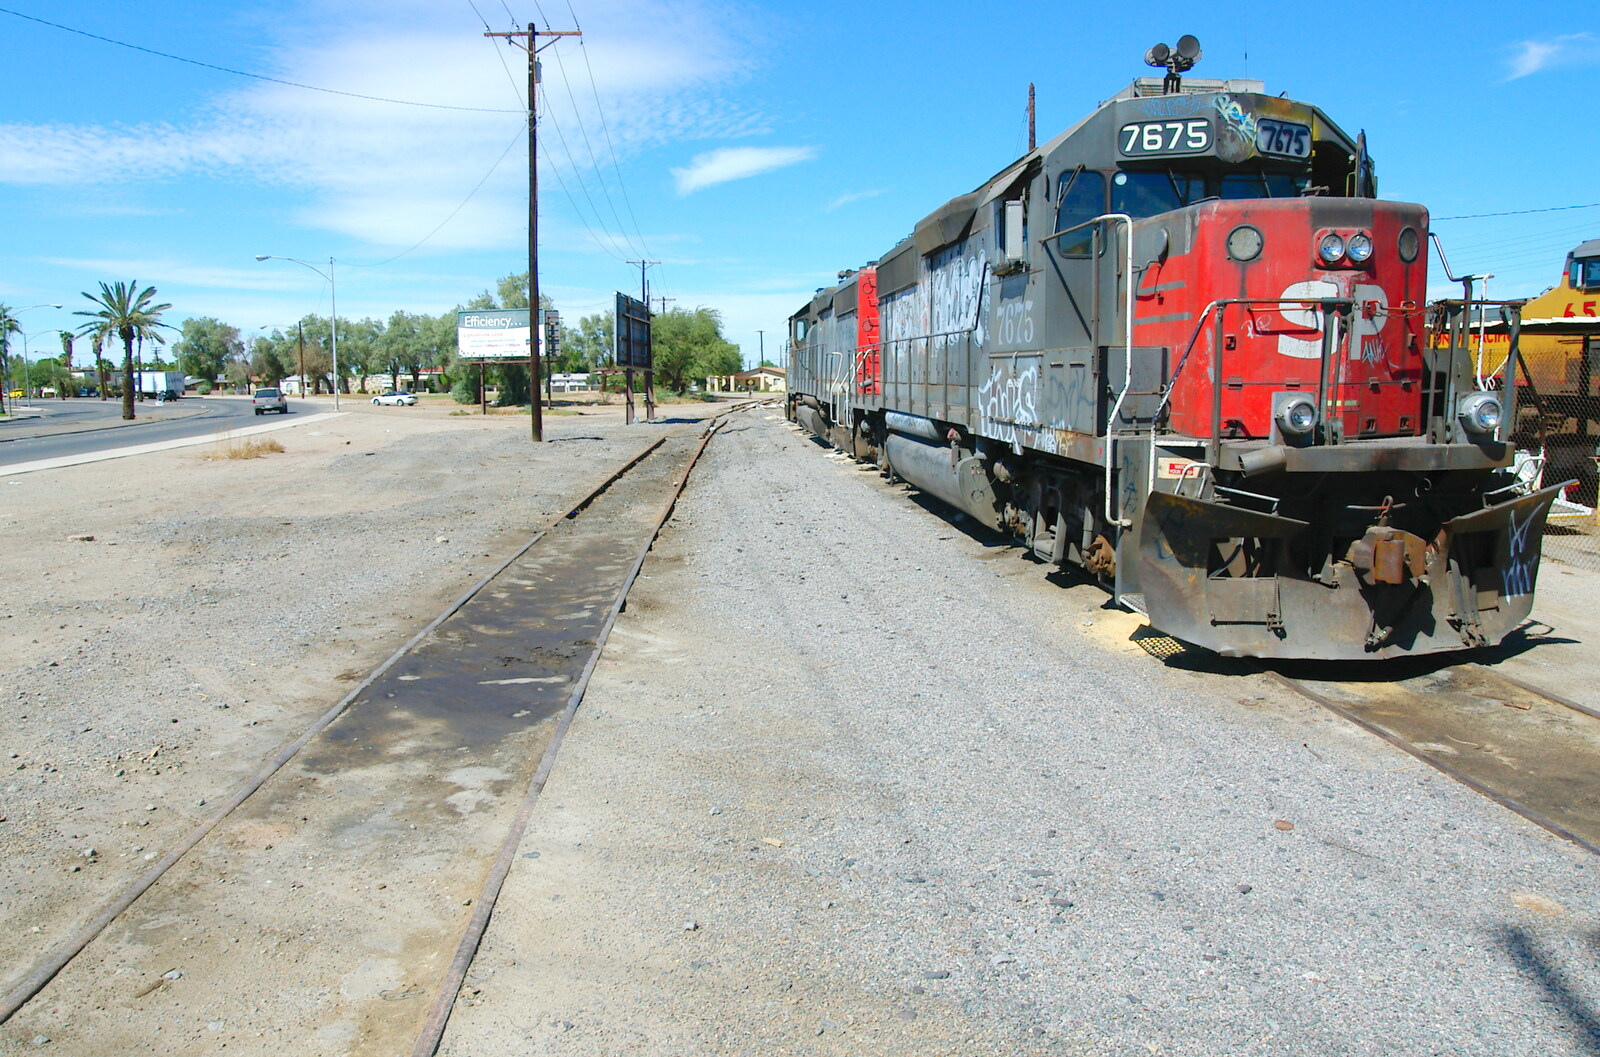 A beat-up train at El Centro from California Desert: El Centro, Imperial Valley, California, US - 24th September 2005